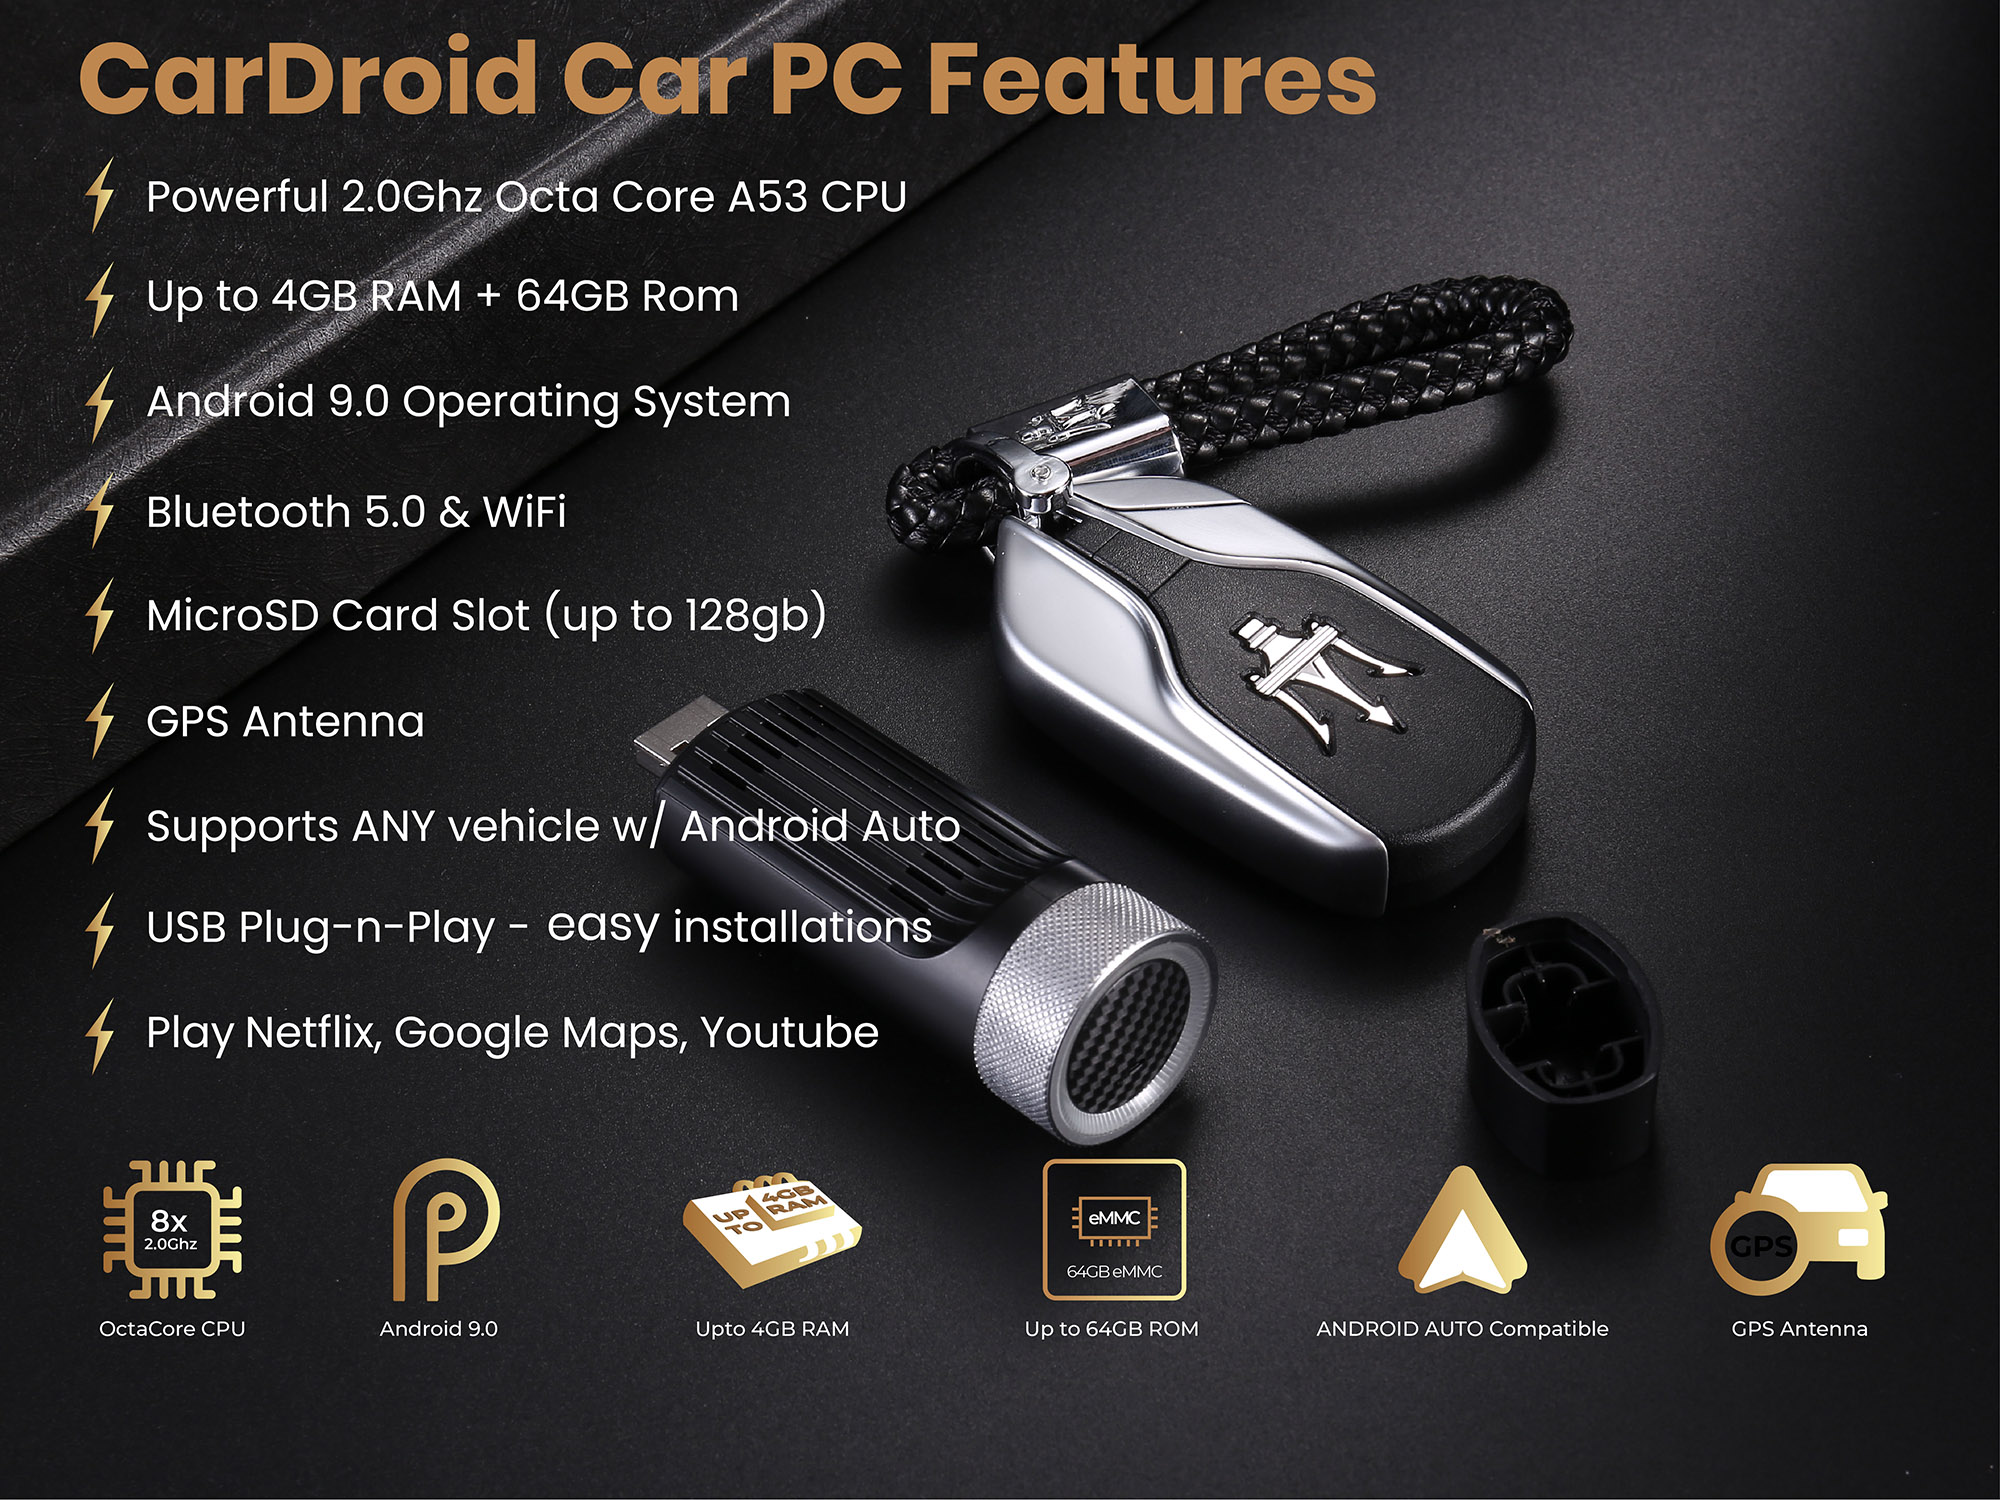 CarDroid Dongle transforms Android Auto giving it full Android Super Powers  - Phandroid